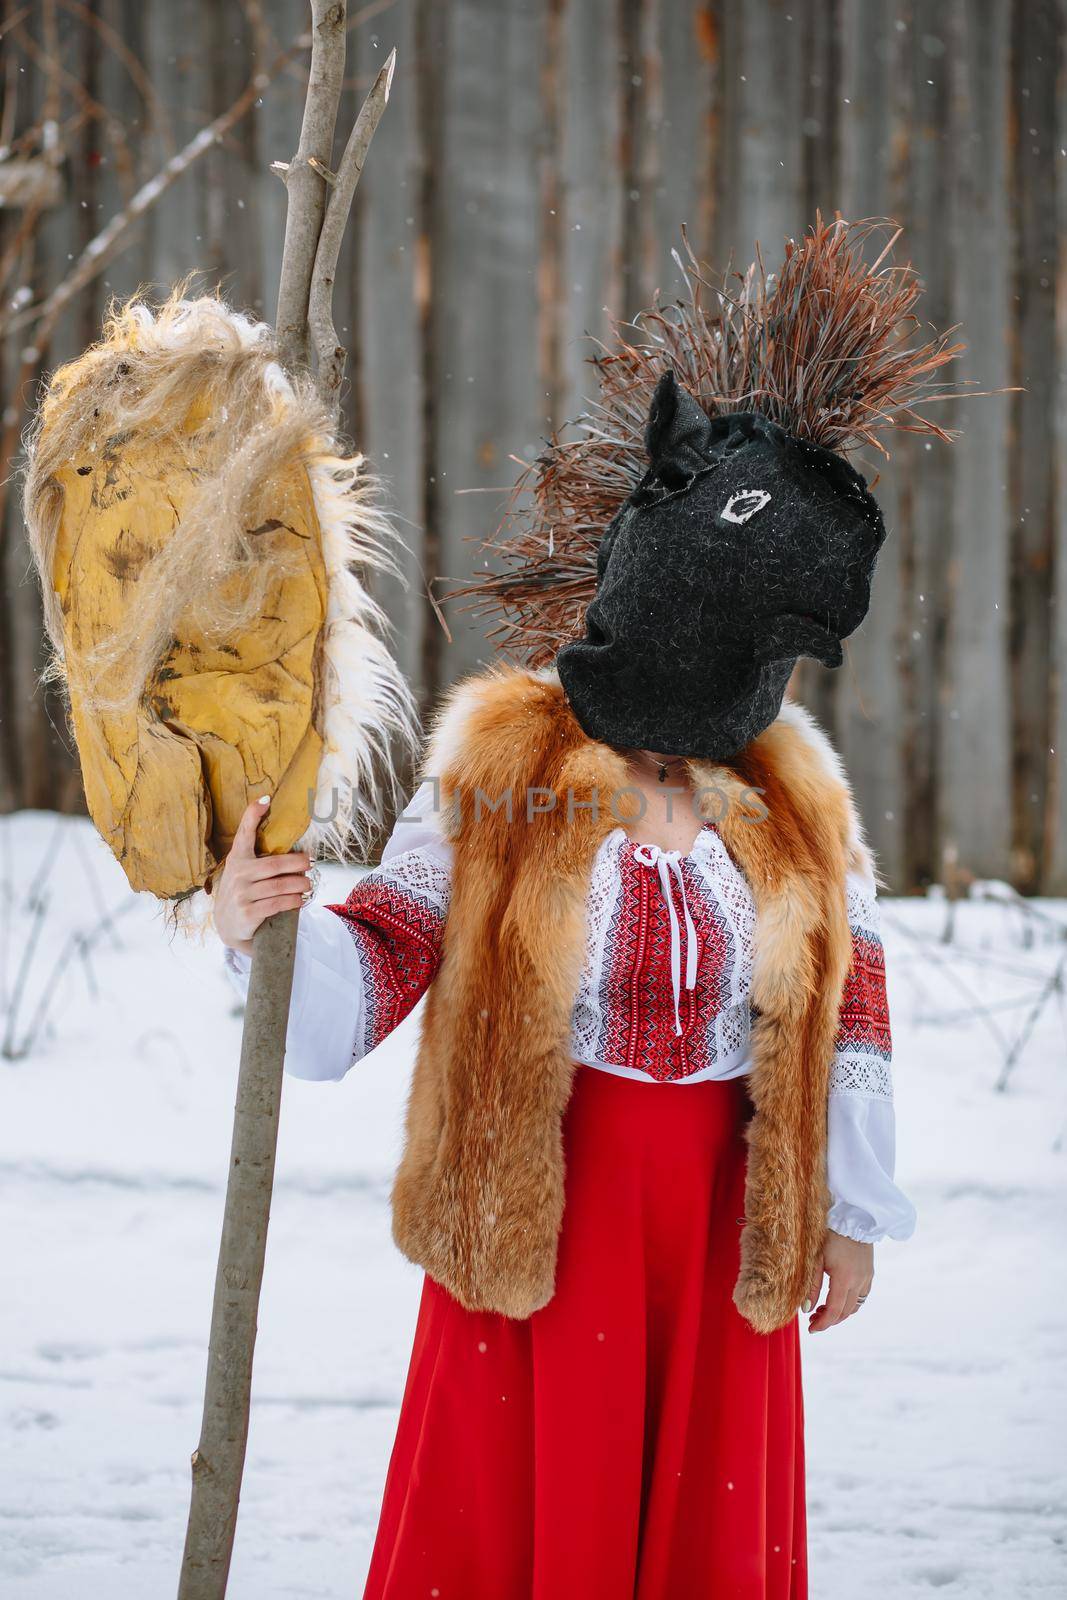 A man in a national costume with the head of an animal celebrates the arrival of the pagan holiday Maslenitsa.